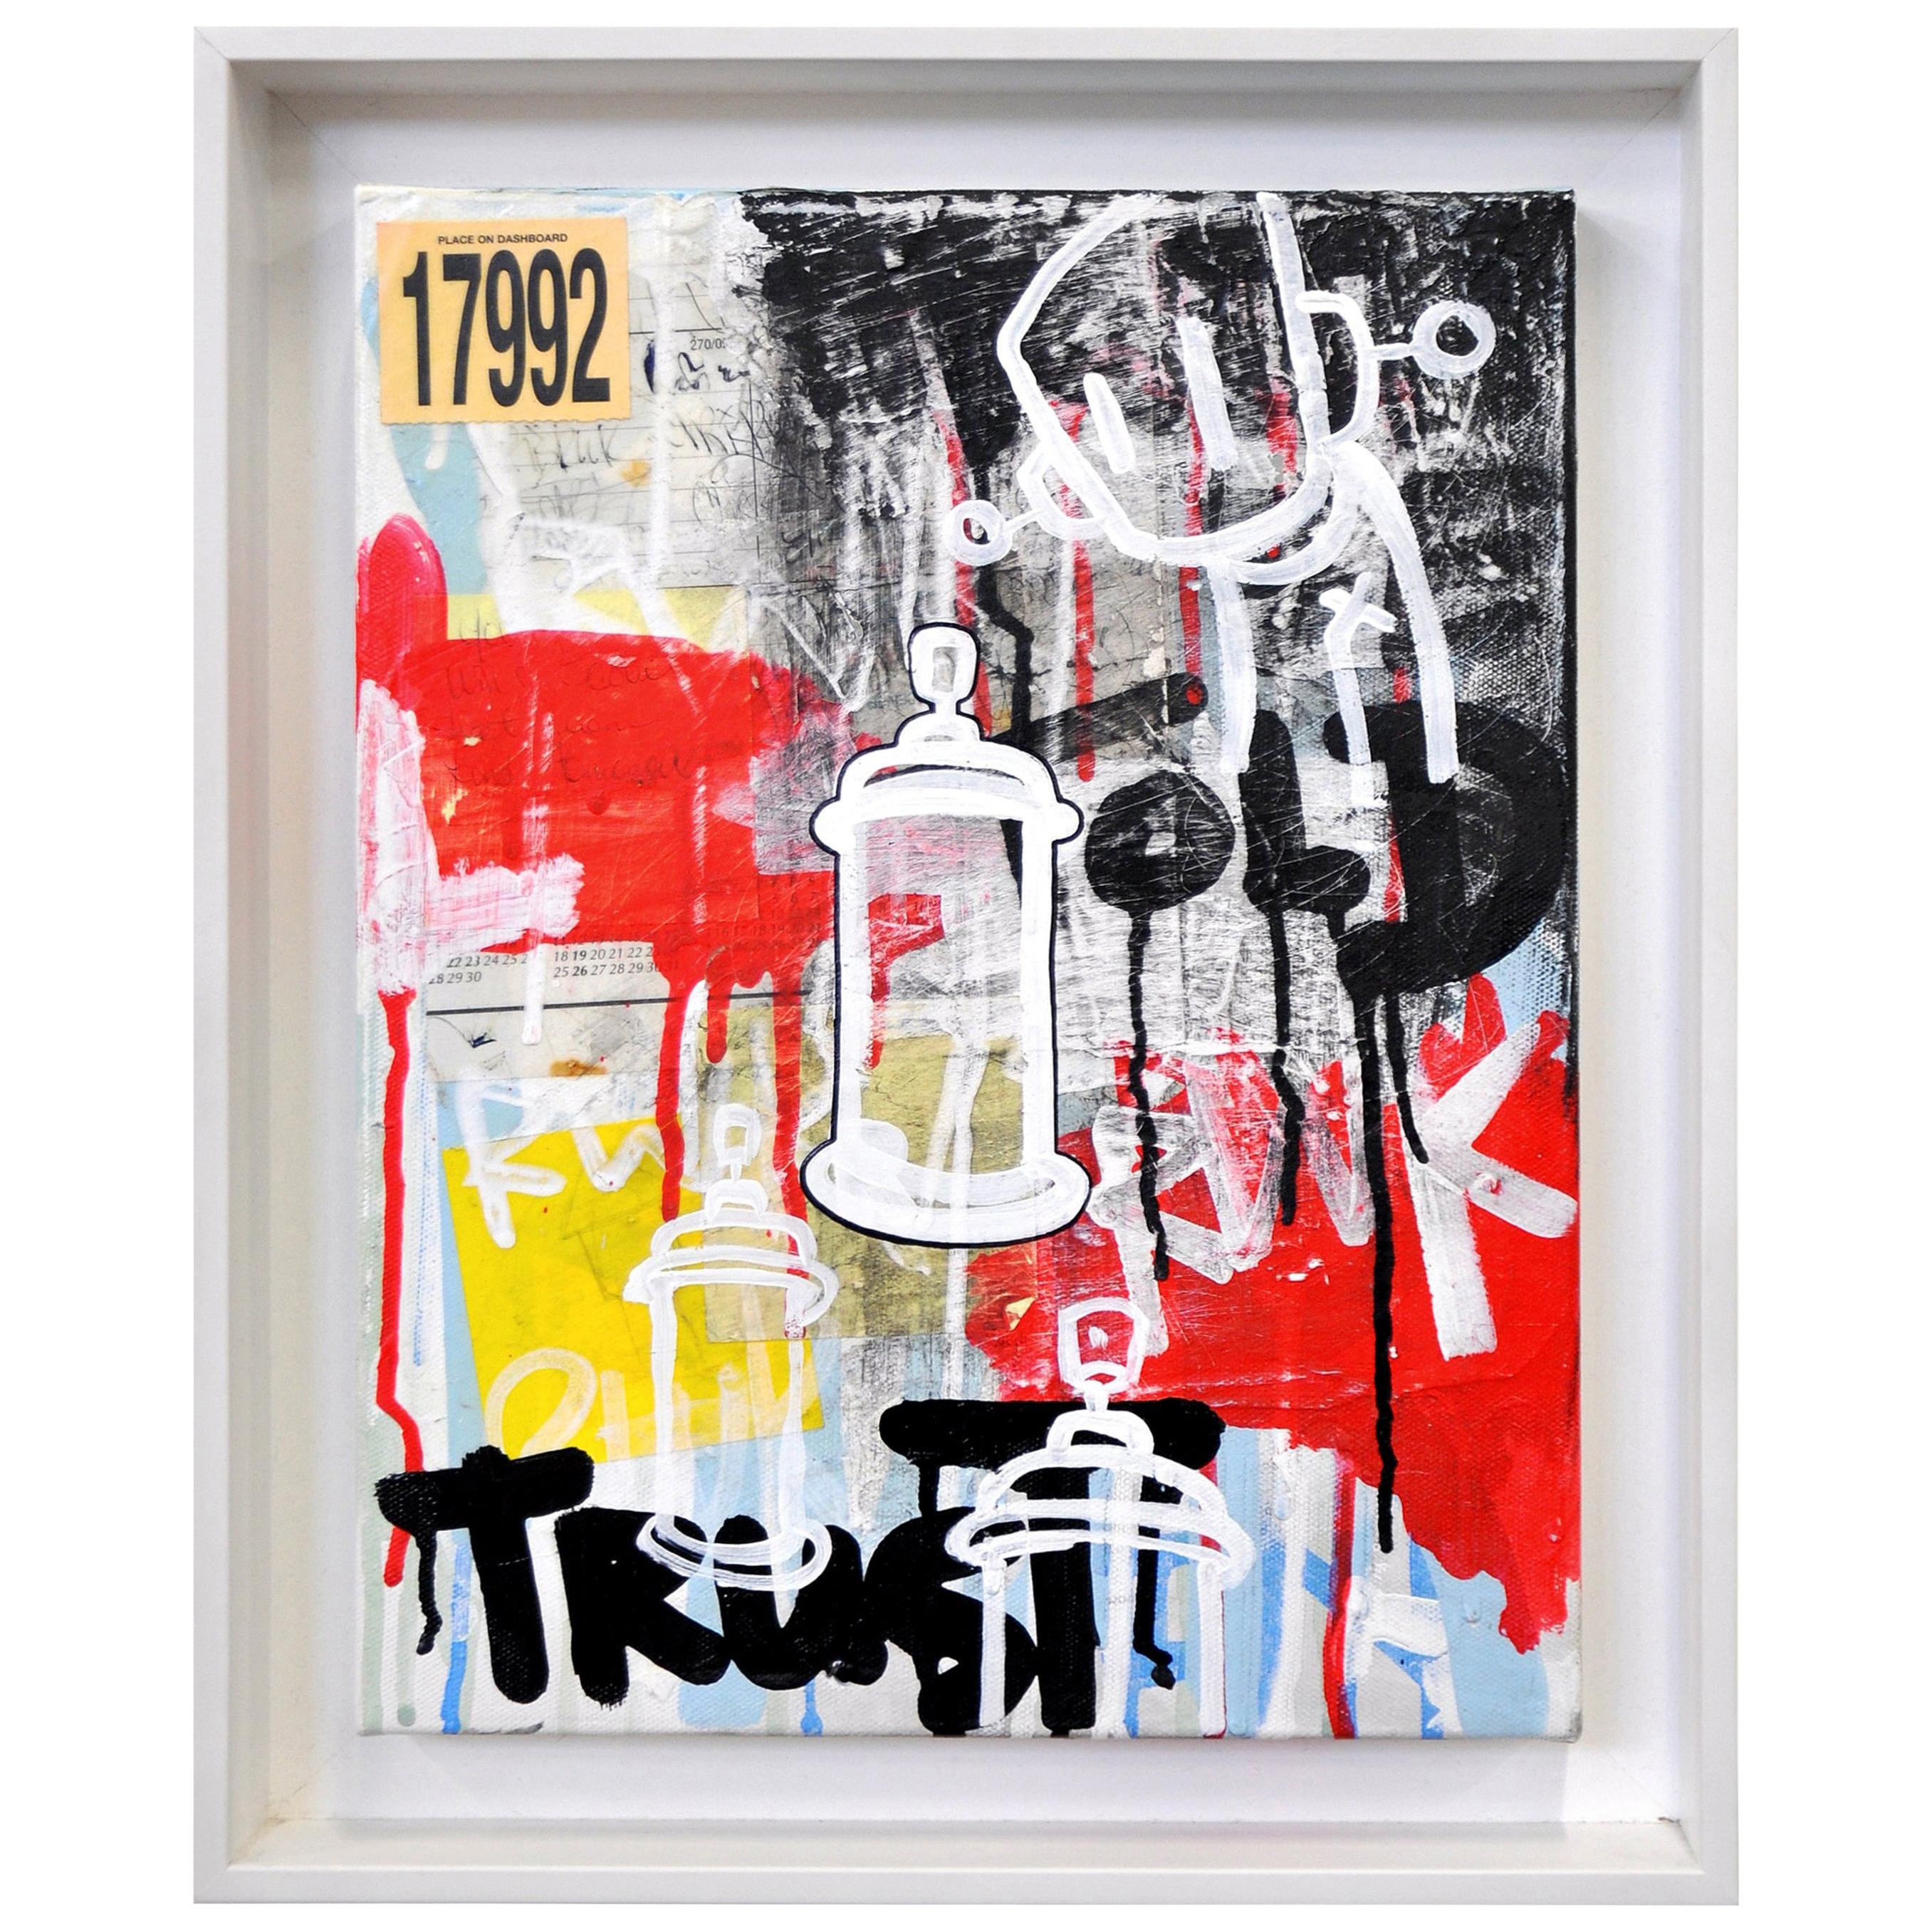 Chris RWK Mixed-Media Painting on Canvas, Take This to Heart, 2014 For Sale